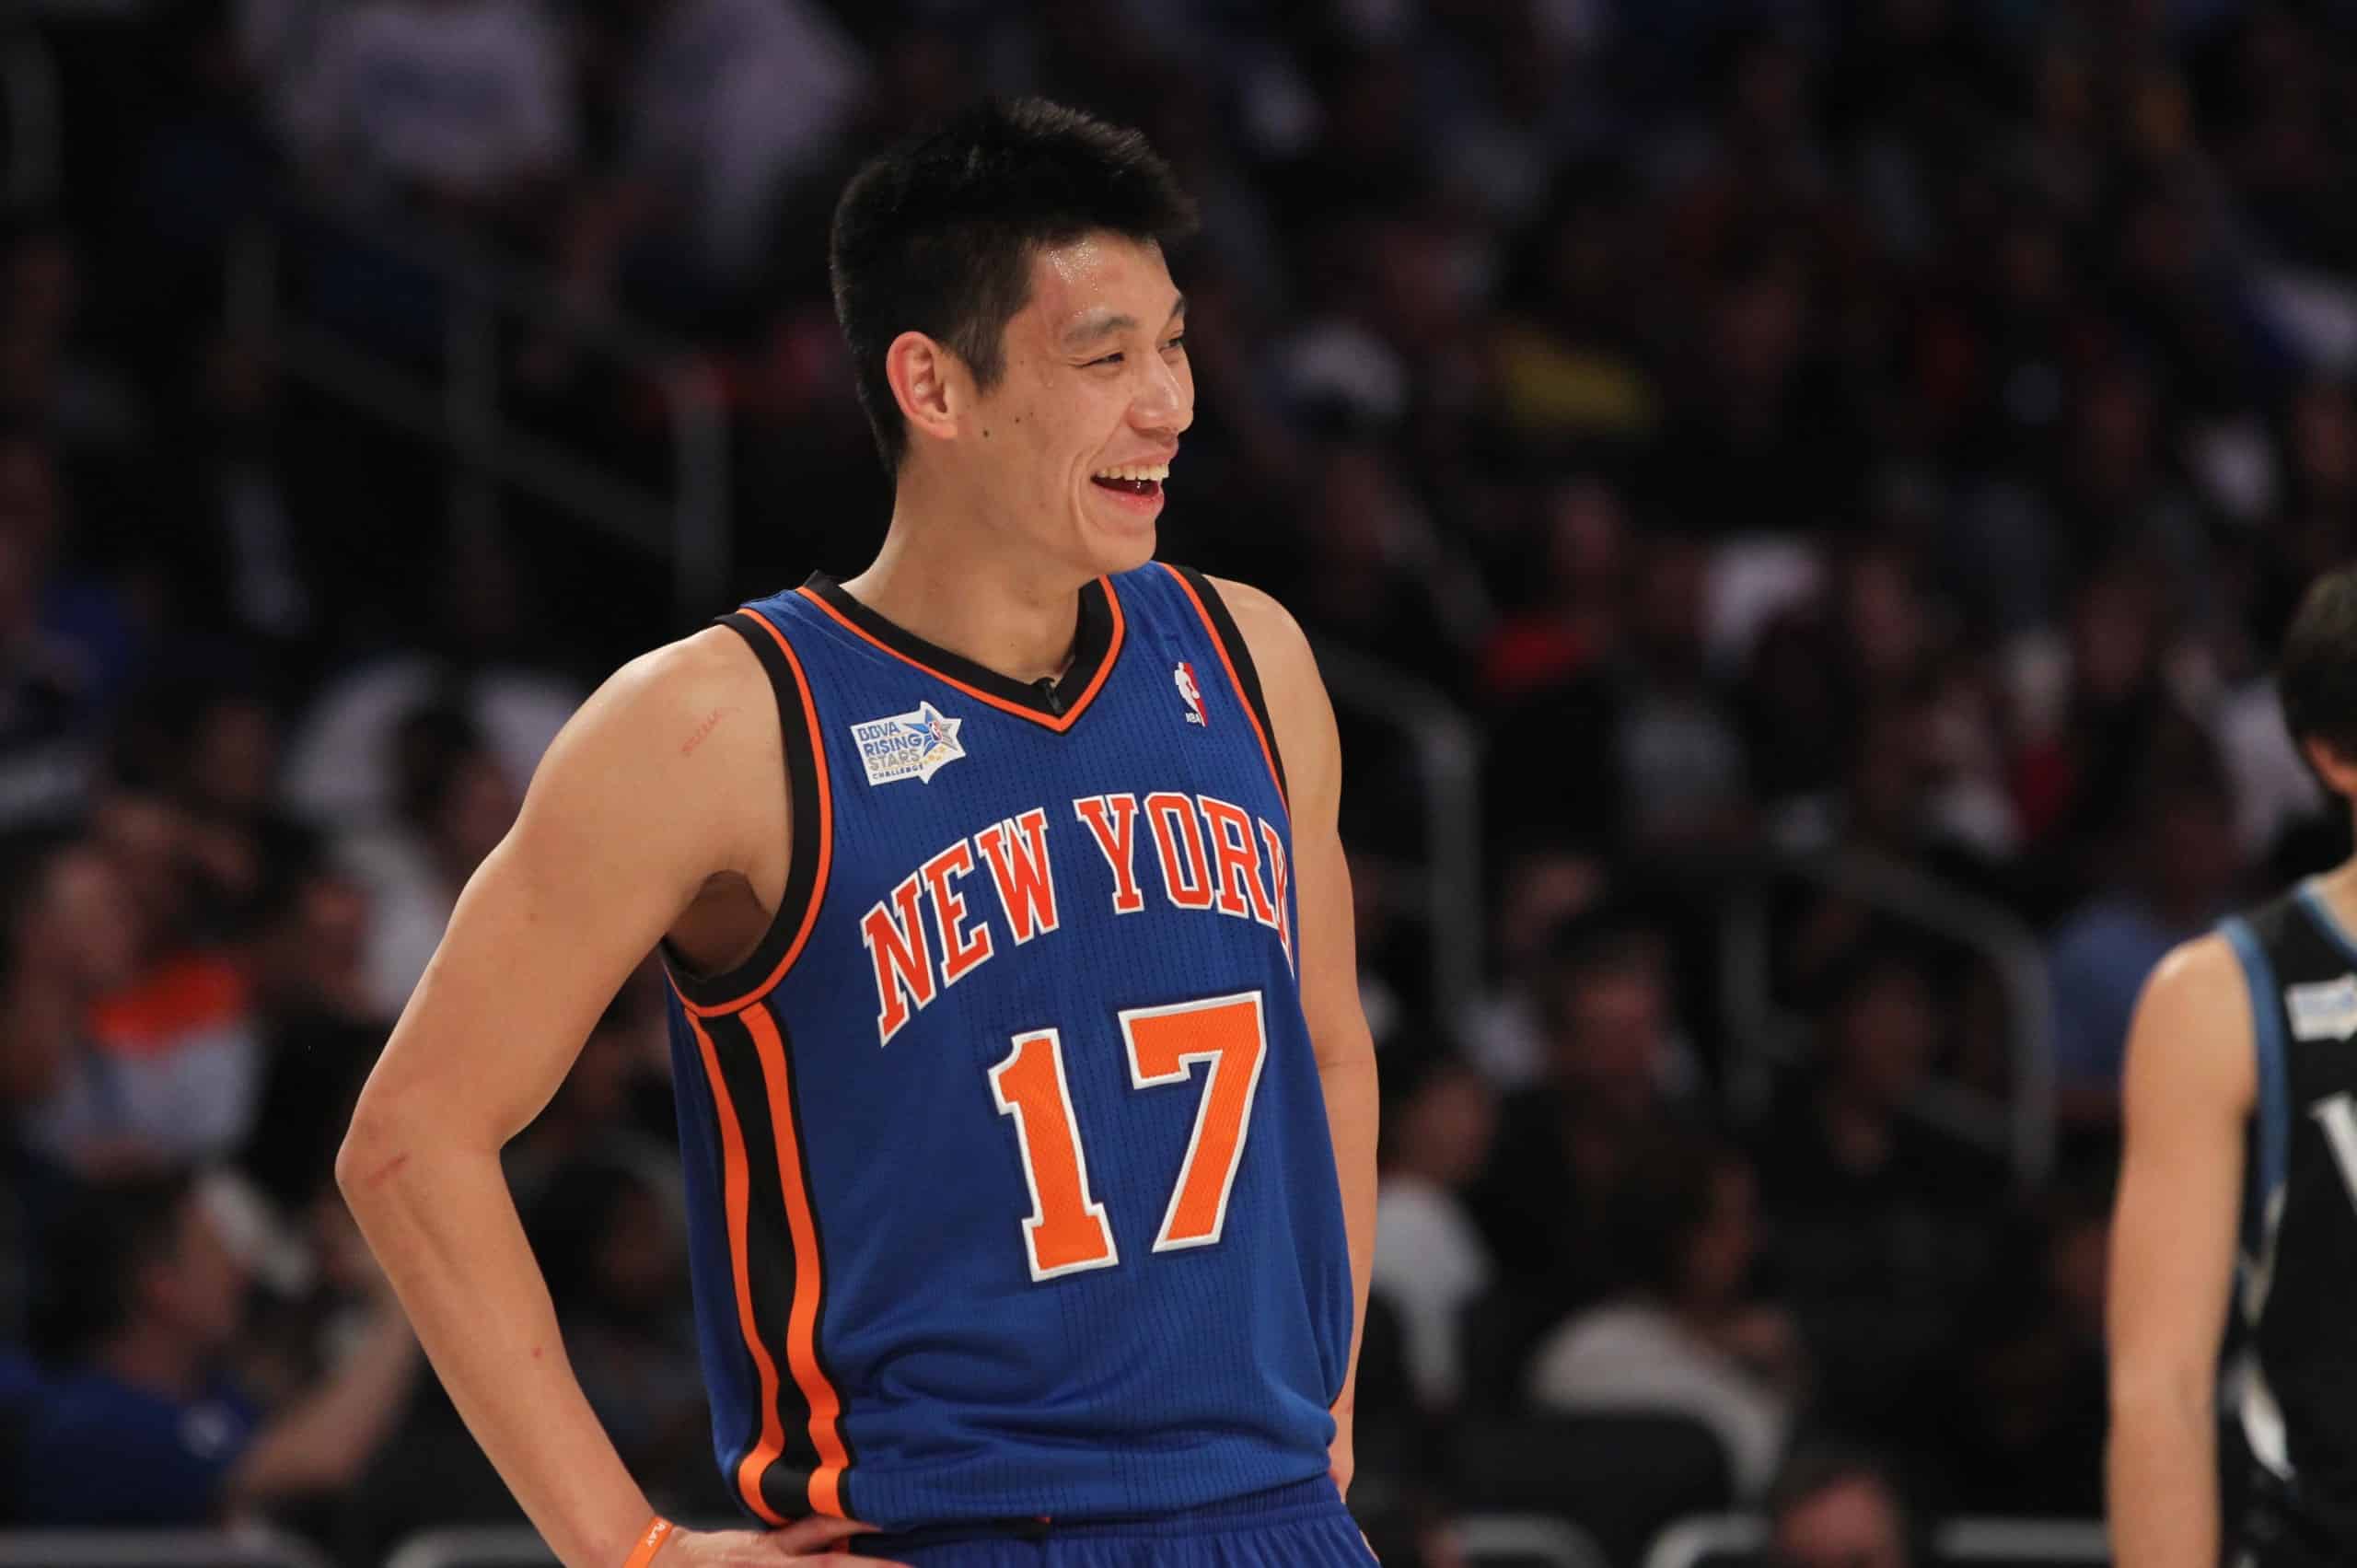 Linsanity Returns: Fans Pour in for Jeremy Lin at Brooklyn Nets